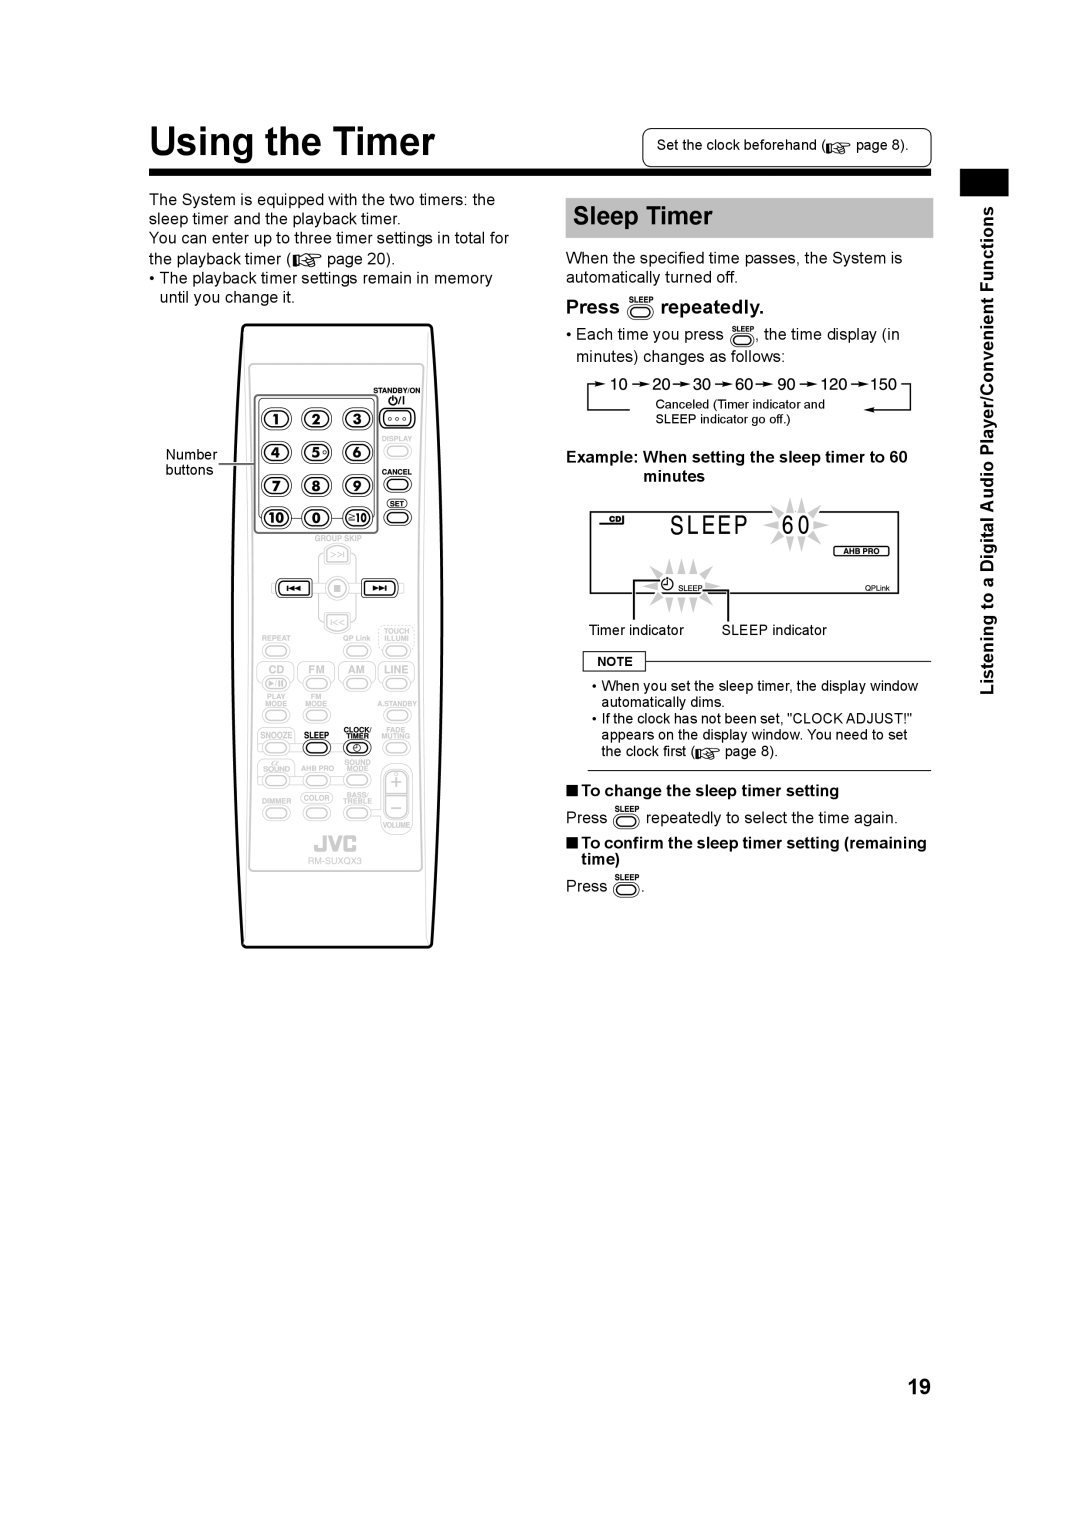 JVC GVT0182-005A, UX-QX3A, UX-QX3W manual Using the Timer, Press repeatedly, To change the sleep timer setting 